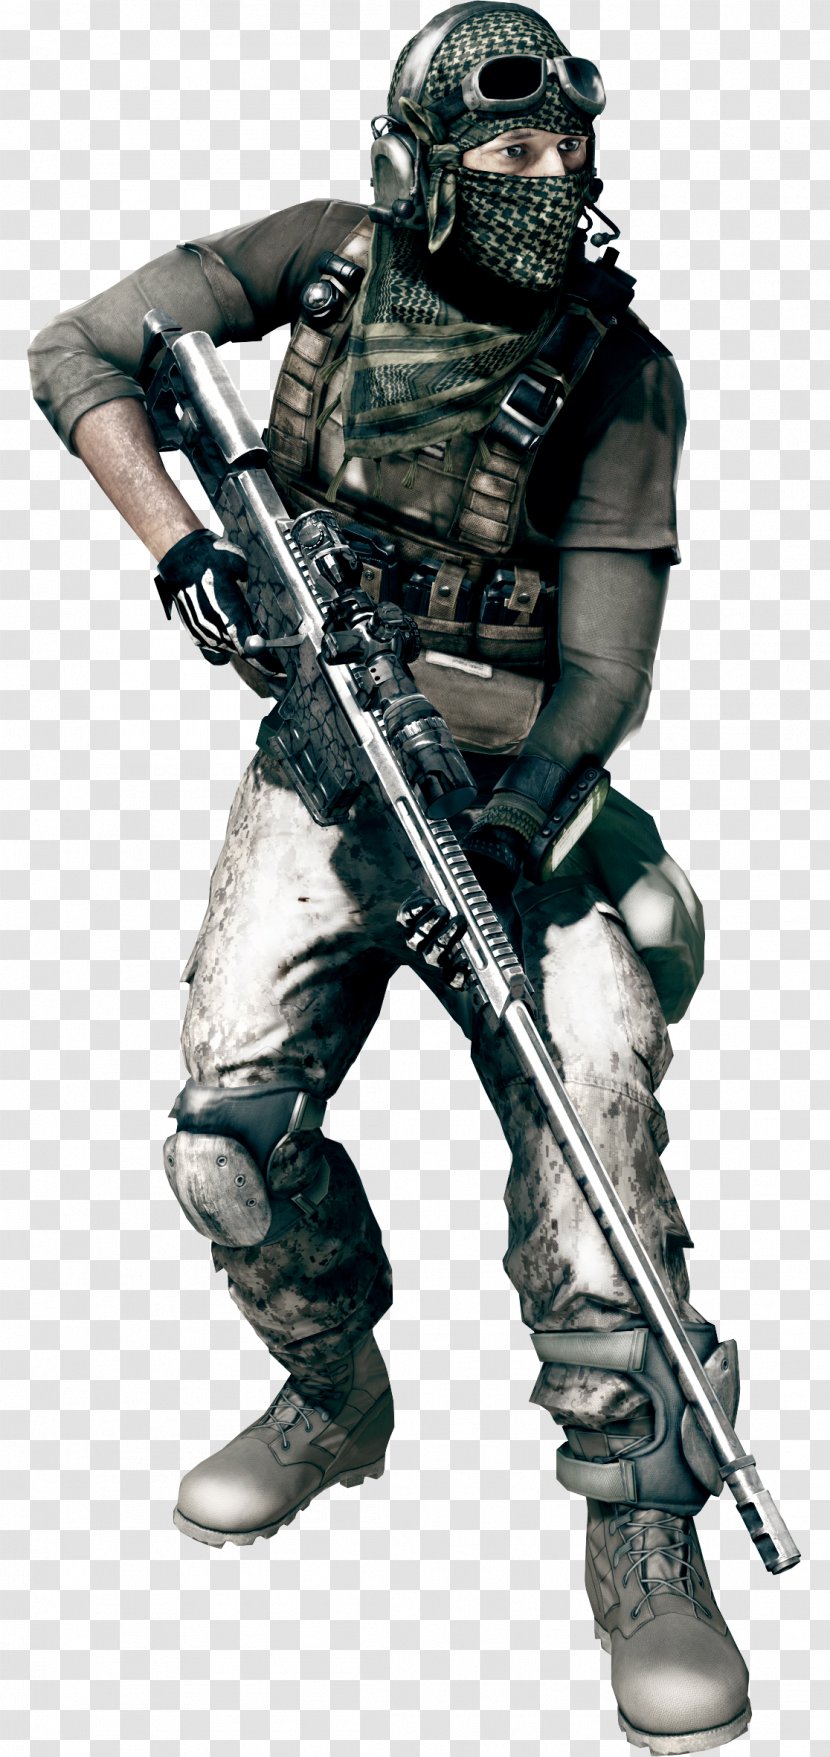 Battlefield 3 2 Heroes Battlefield: Bad Company 4 - Reconnaissance - Free Download Transparent PNG